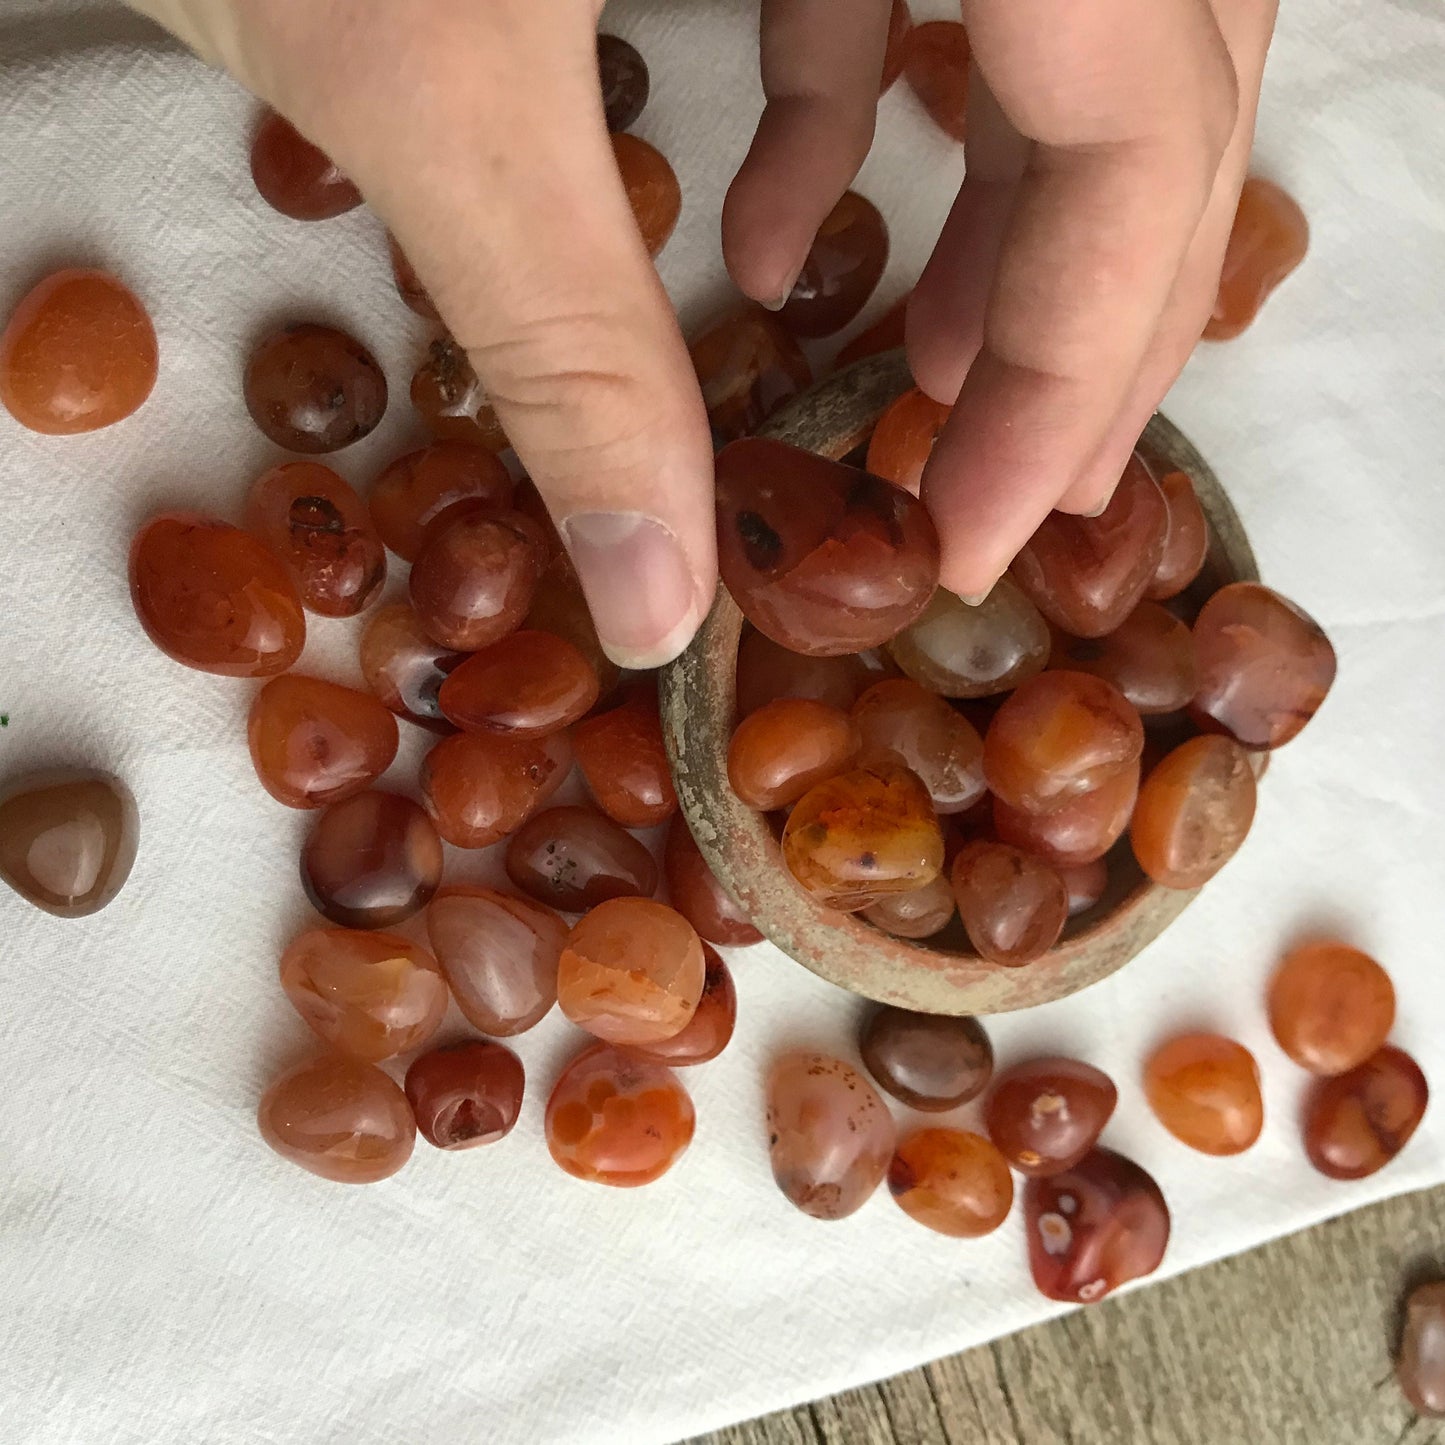 Carnelian Agate Tumbled Polished (Approx. 5/8" - 3/4") Polished Stone for Crystal Grid, Wire Wrapping or Craft Supply BIN-1333